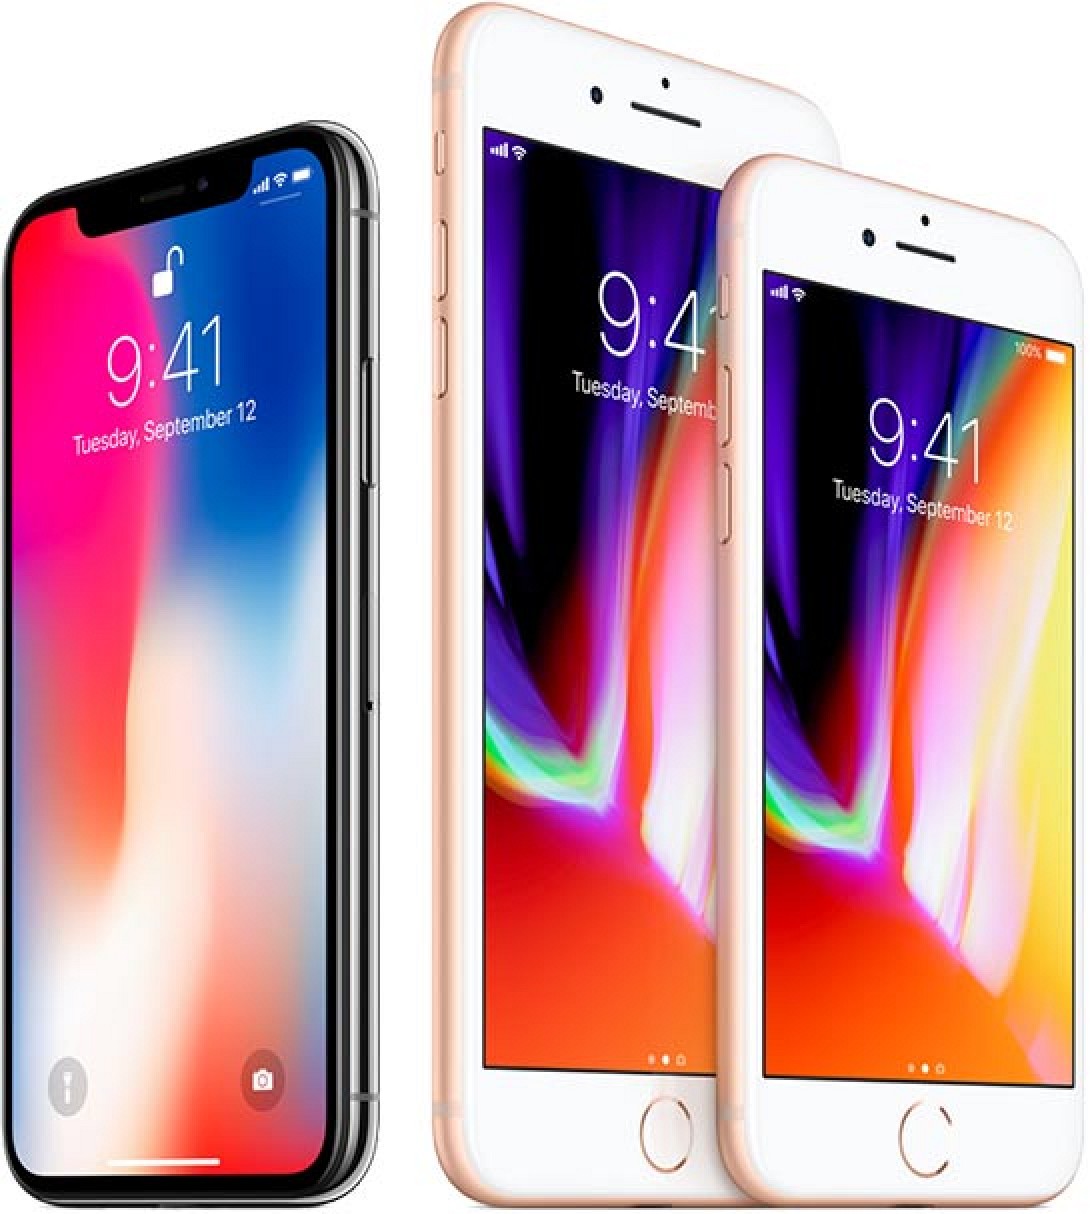 iPhone X vs. iPhone 8 and 8 Plus Display Sizes, Cameras, Battery Life